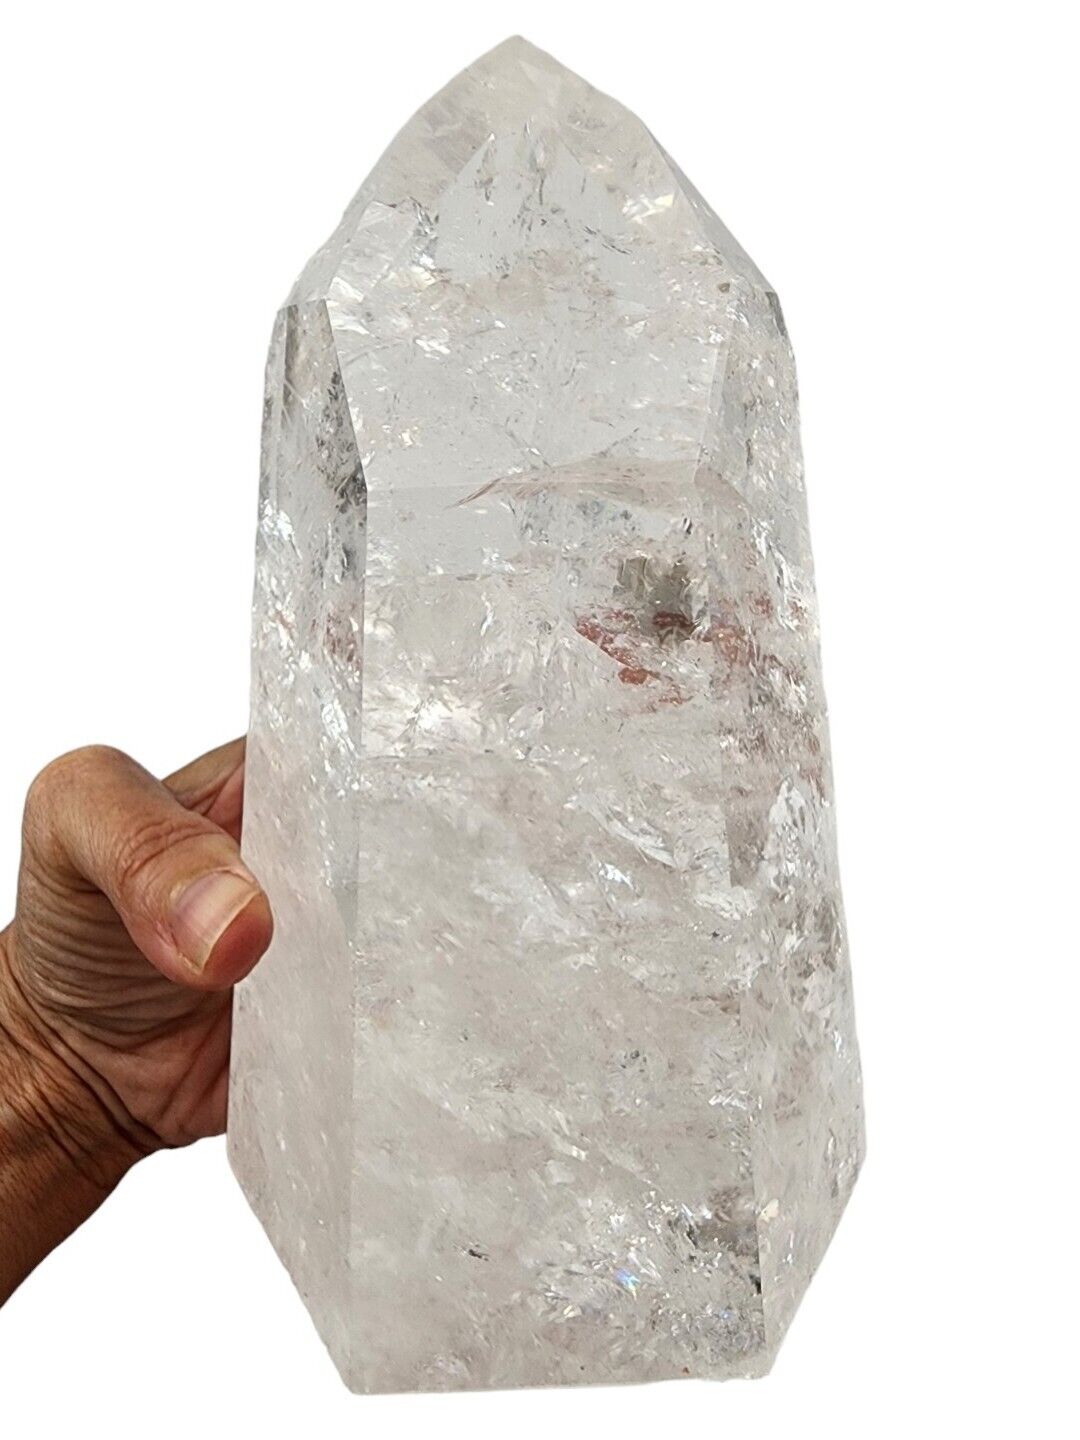 XL Clear Quartz Crystal Polished Tower with lots of Rainbows Brazil 2lbs 14.1oz